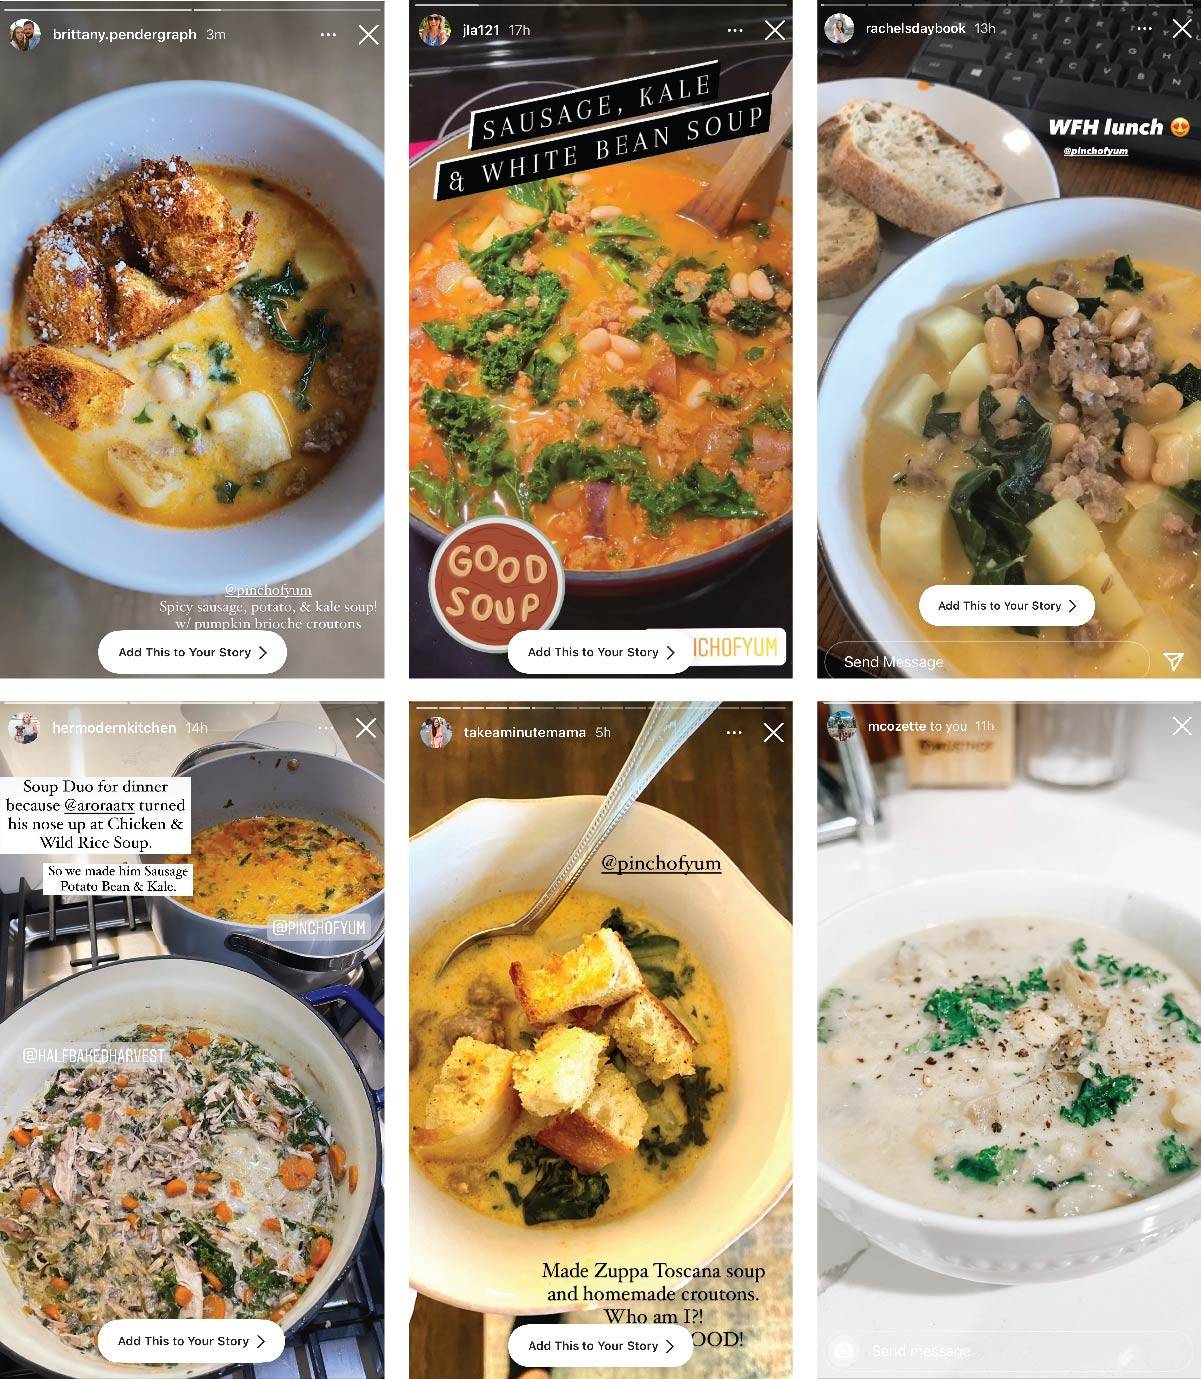 Instagram screenshots of POY readers making the Sausage Kale and White Bean Soup recipe.